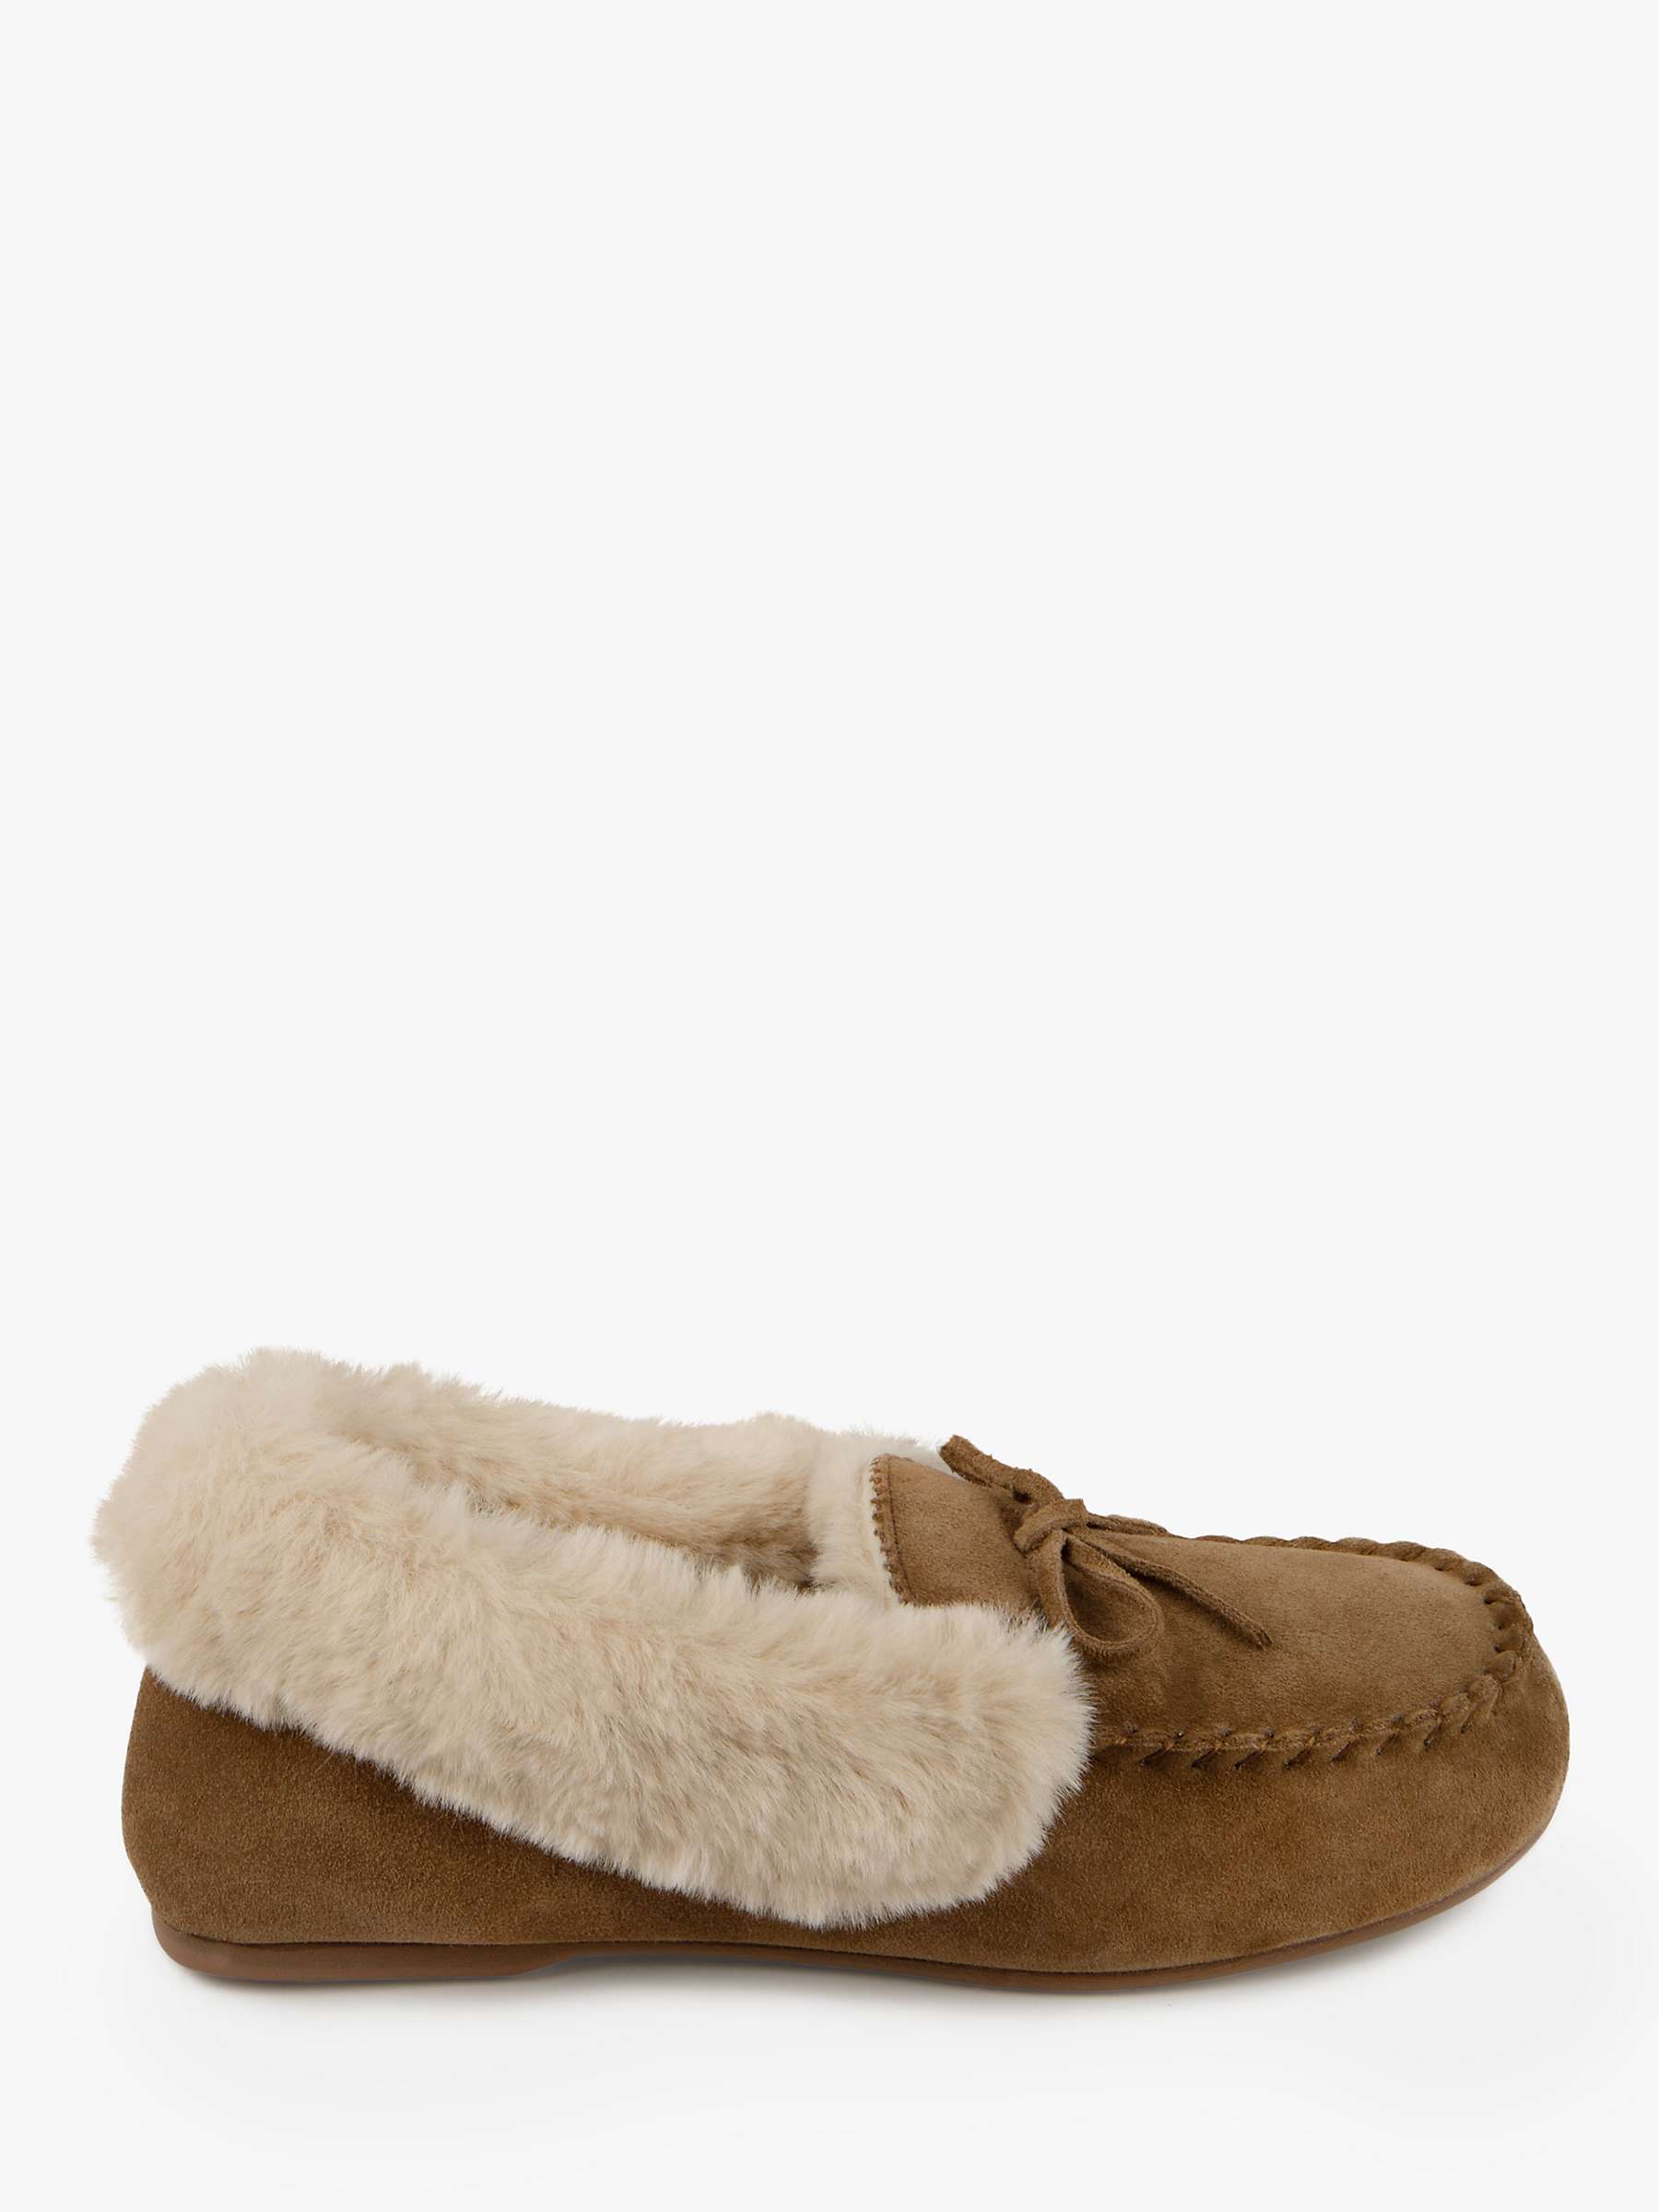 Buy totes Genuine Suede Moccasin with Faux Fur Lining Slippers, Tan Online at johnlewis.com